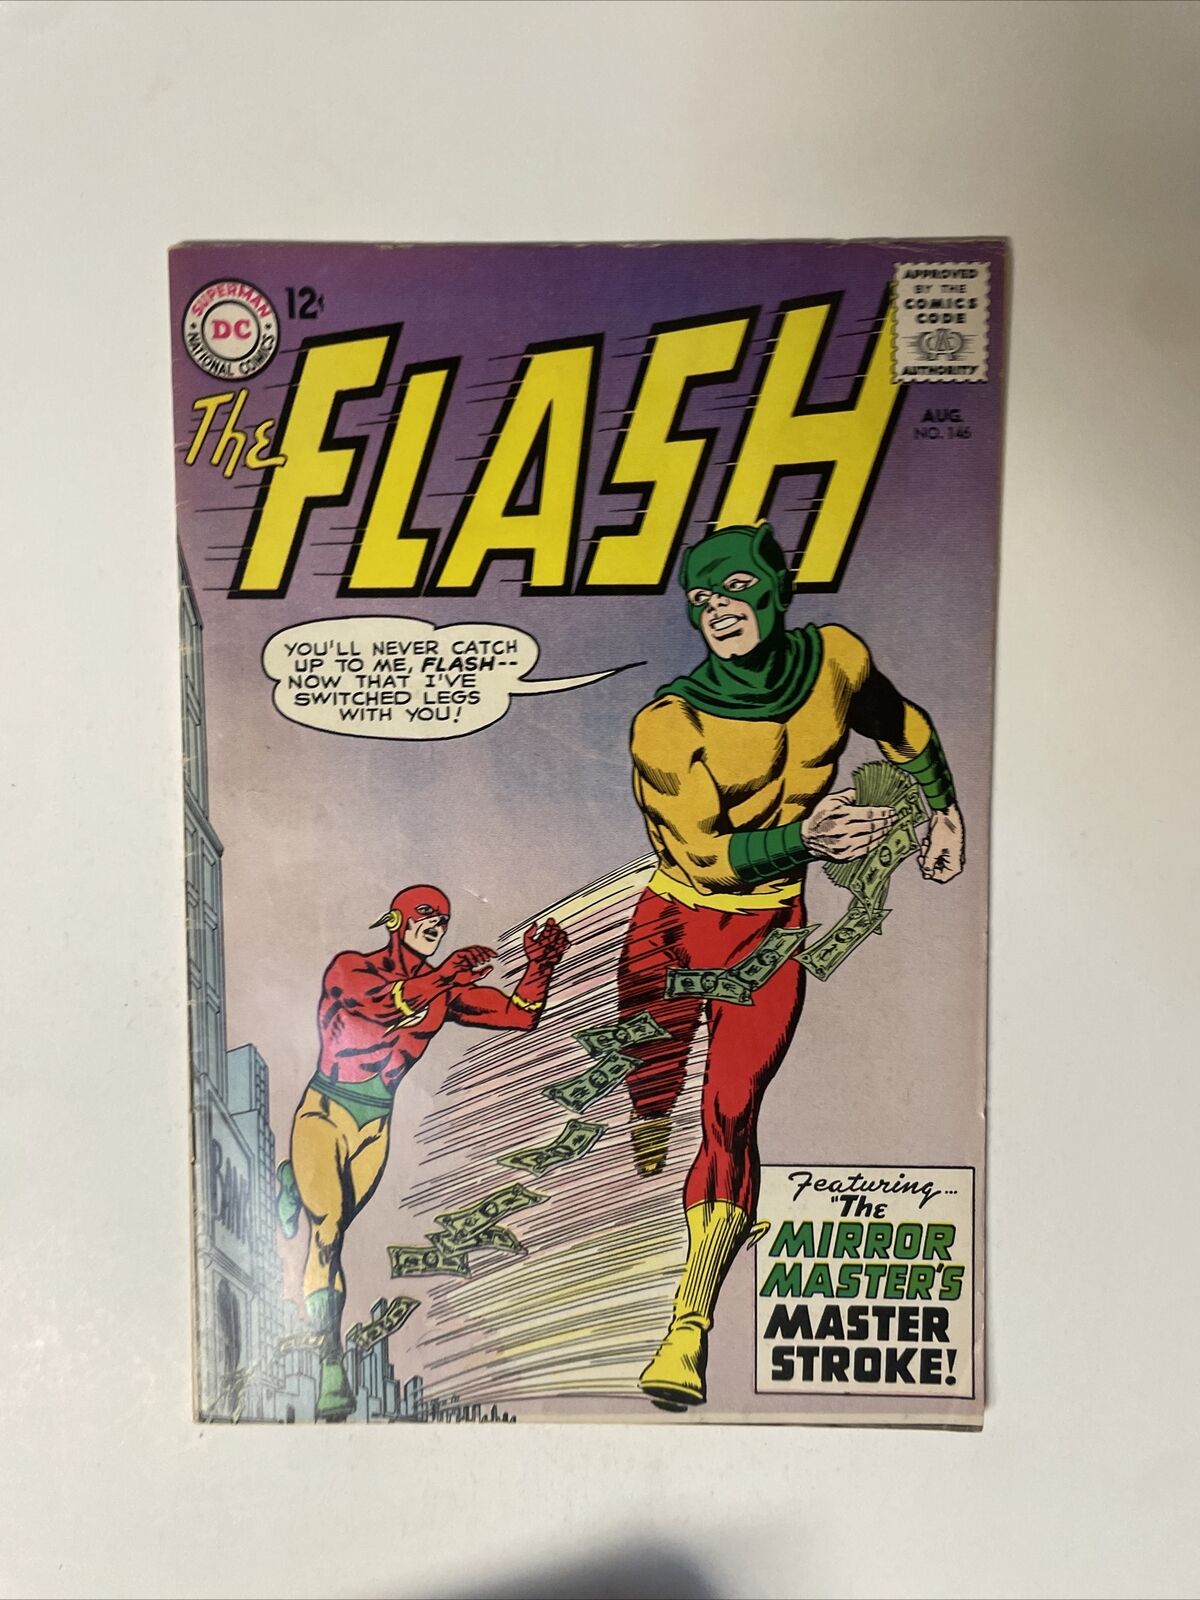 THE FLASH #146 FN/VF